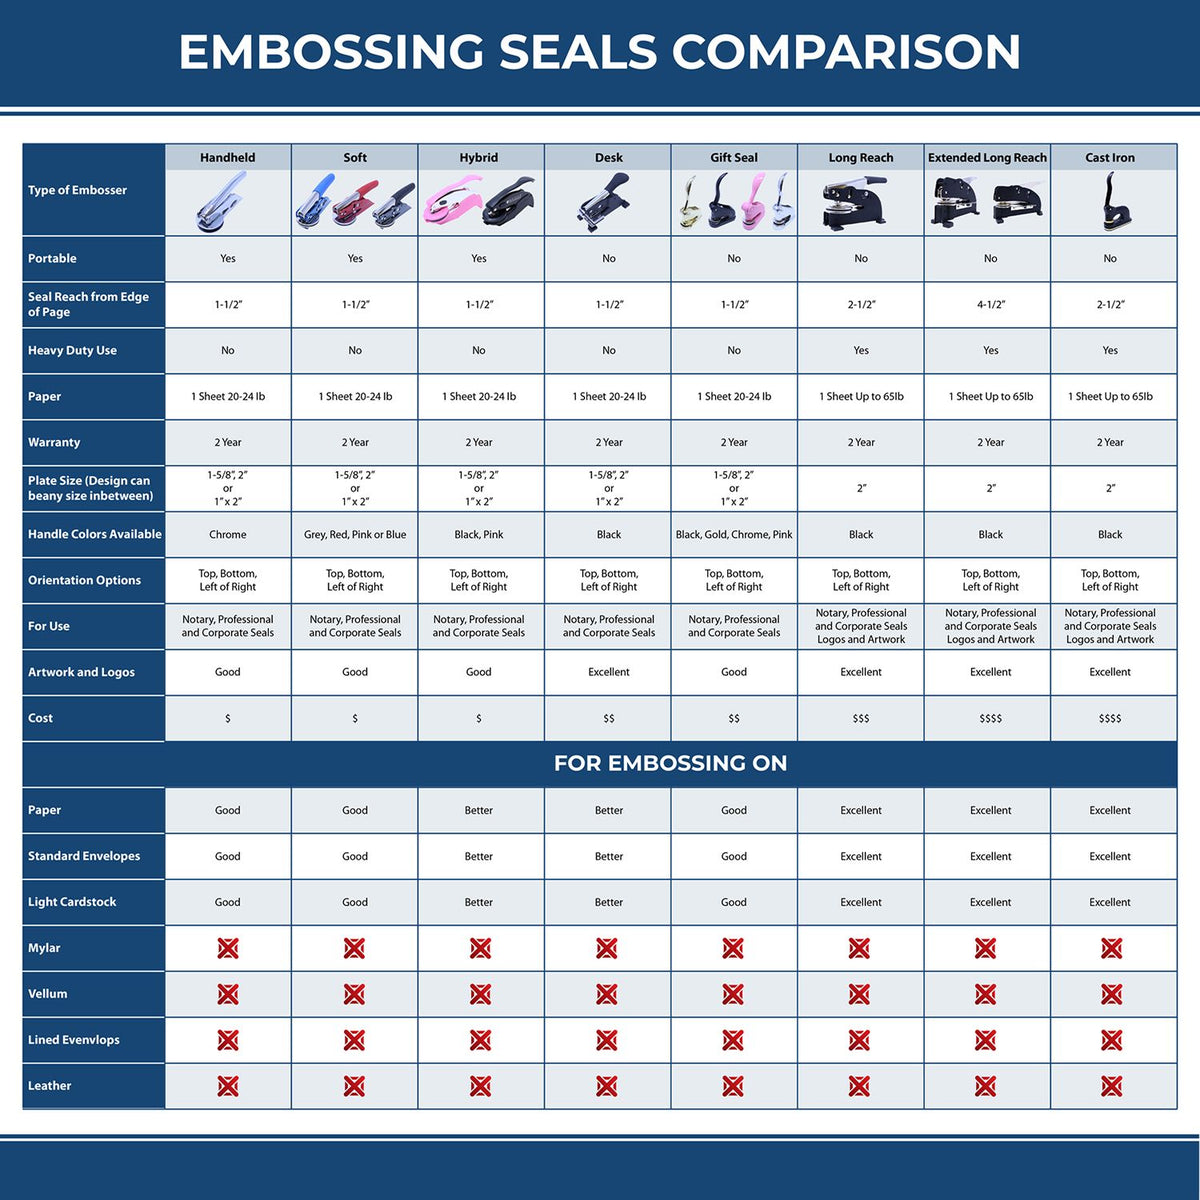 A comparison chart for the different types of mount models available for the Heavy Duty Cast Iron Nevada Land Surveyor Seal Embosser.